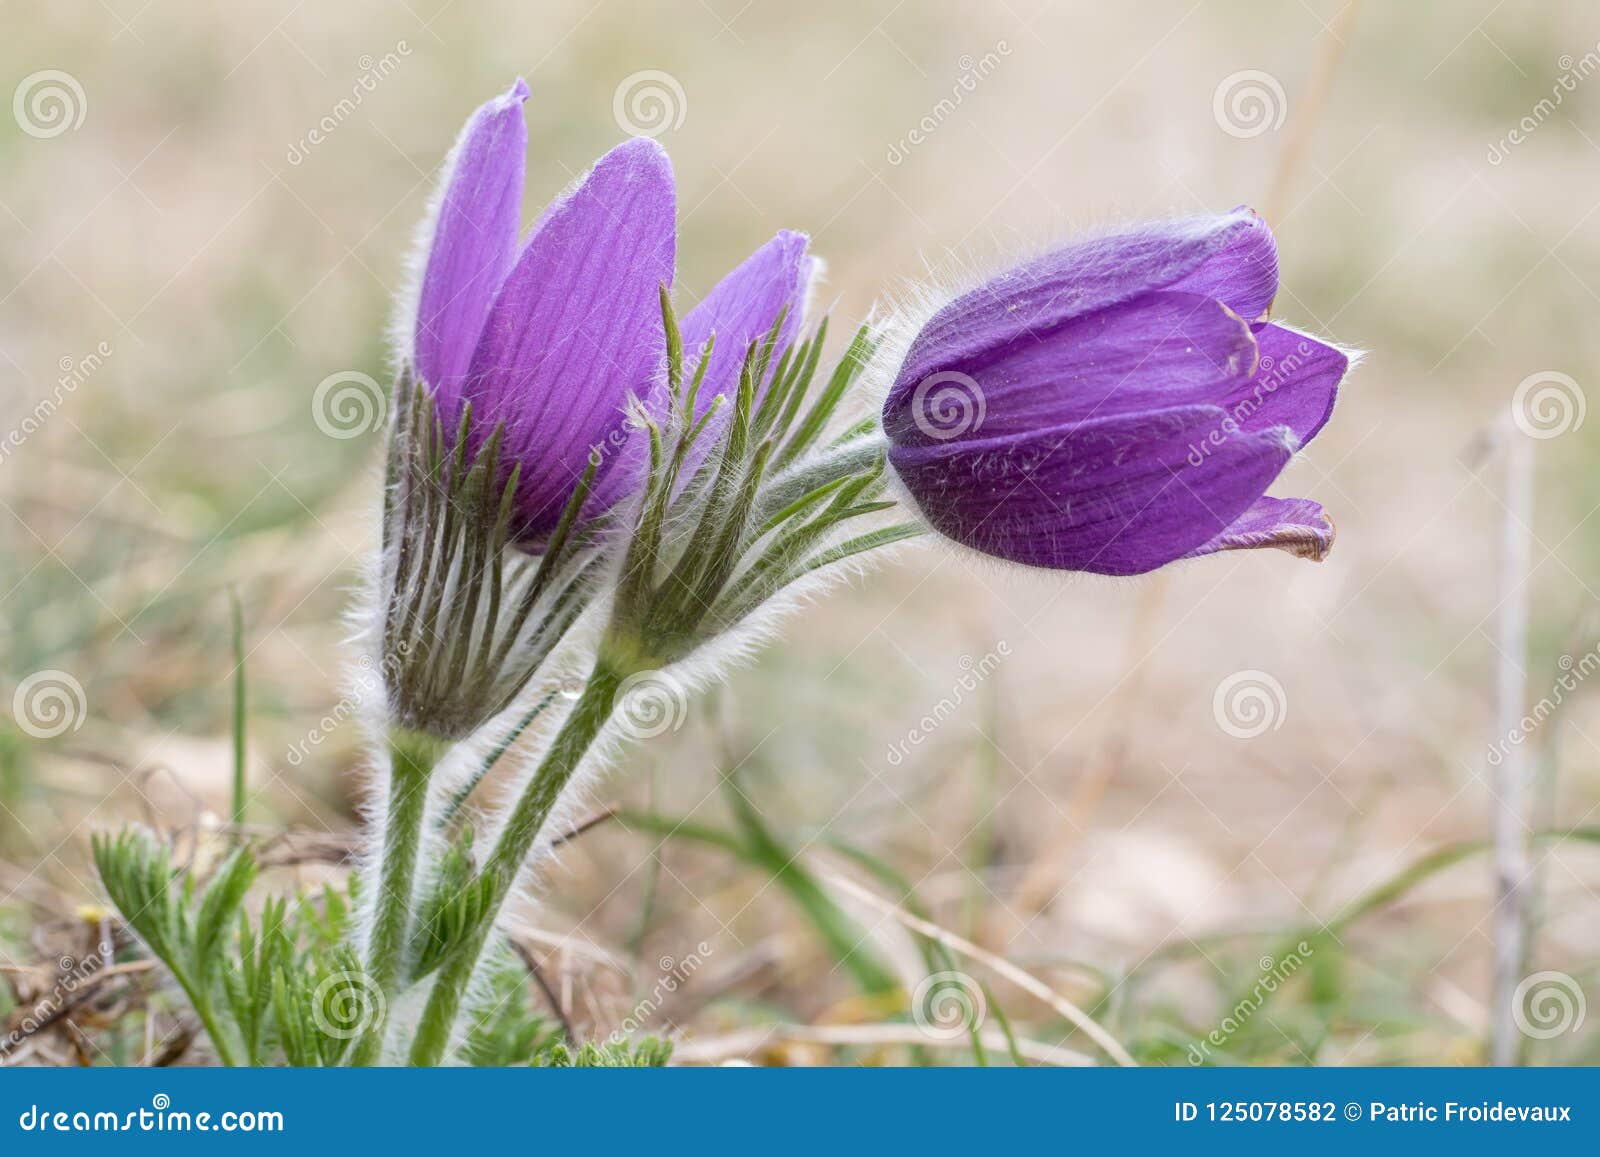 beautiful closeup of two pasque flower - anemone pulsatilla - with a nice blurred background